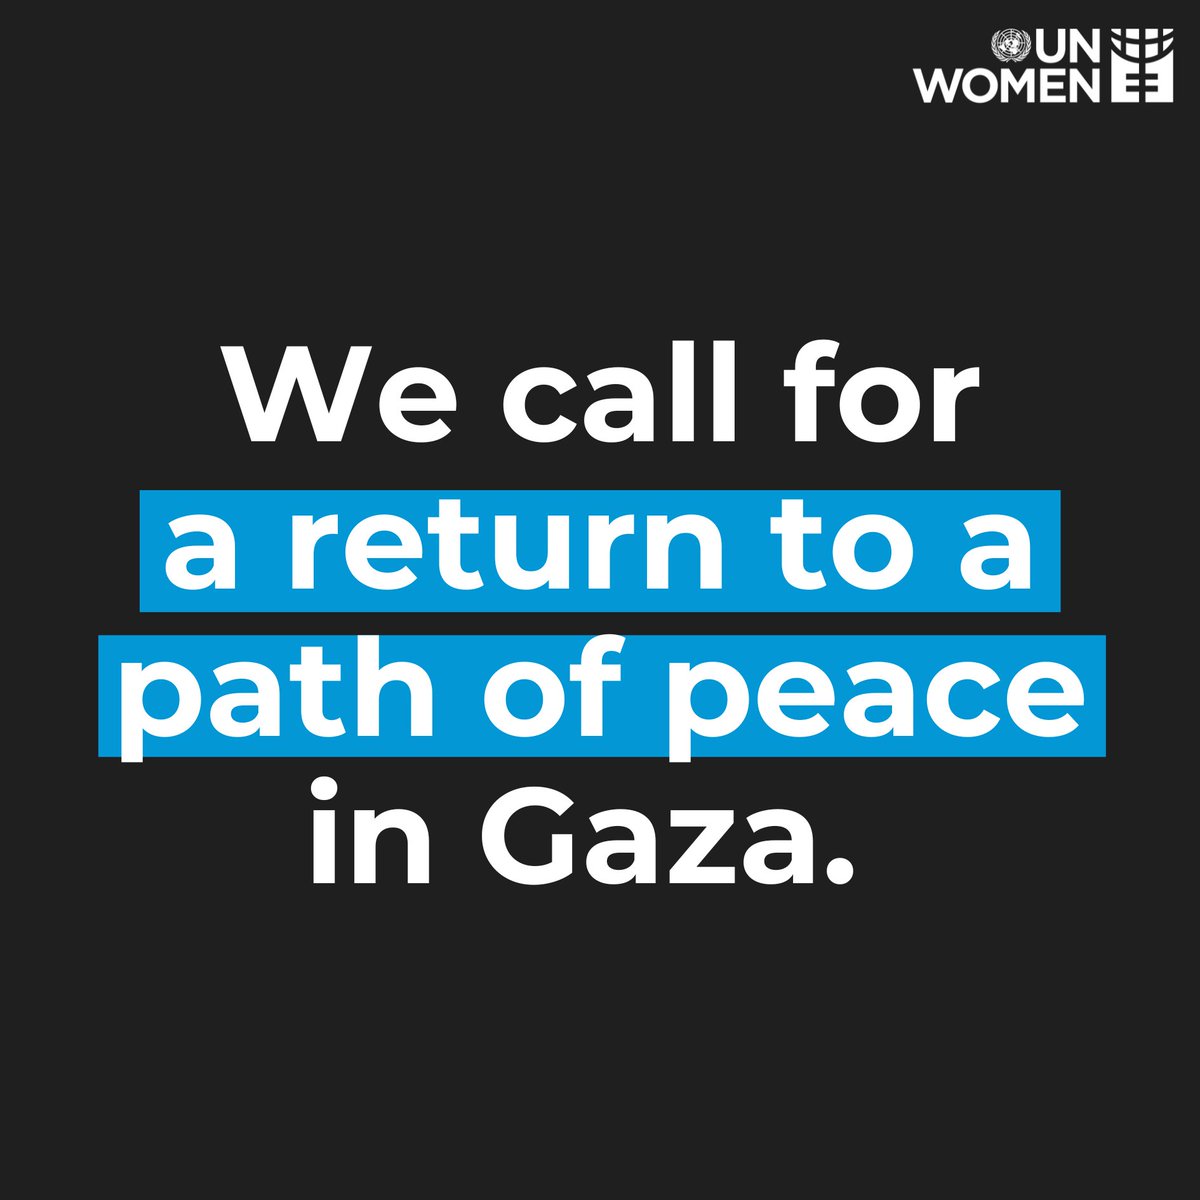 We call for ✅A return to a path of peace. ✅Accountability for crimes committed under international law. ✅Unconditional release of hostages. ✅An end to the death and suffering of people in Gaza.